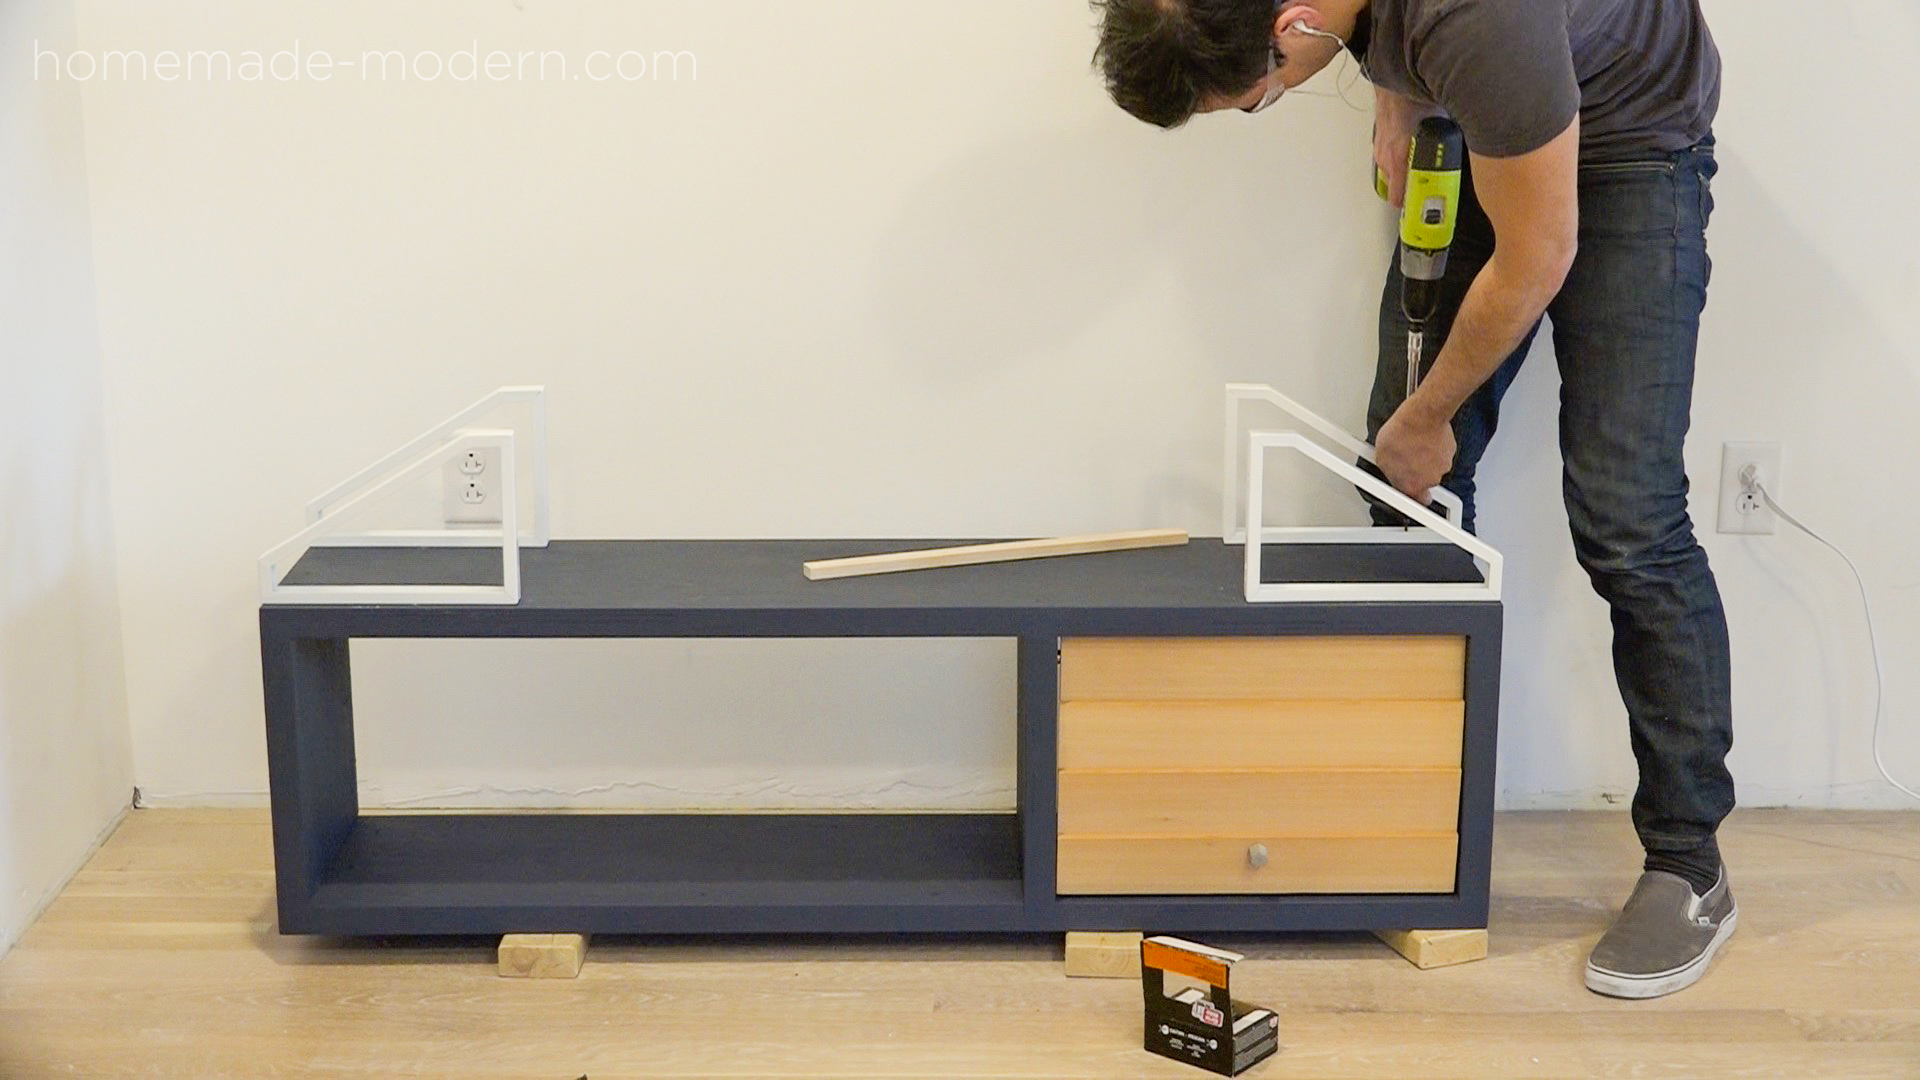 This DIY mid-century model media console is made from materials available at Home Depot for less than $100.  Full instructions can be found at HomeMade-modern.com.